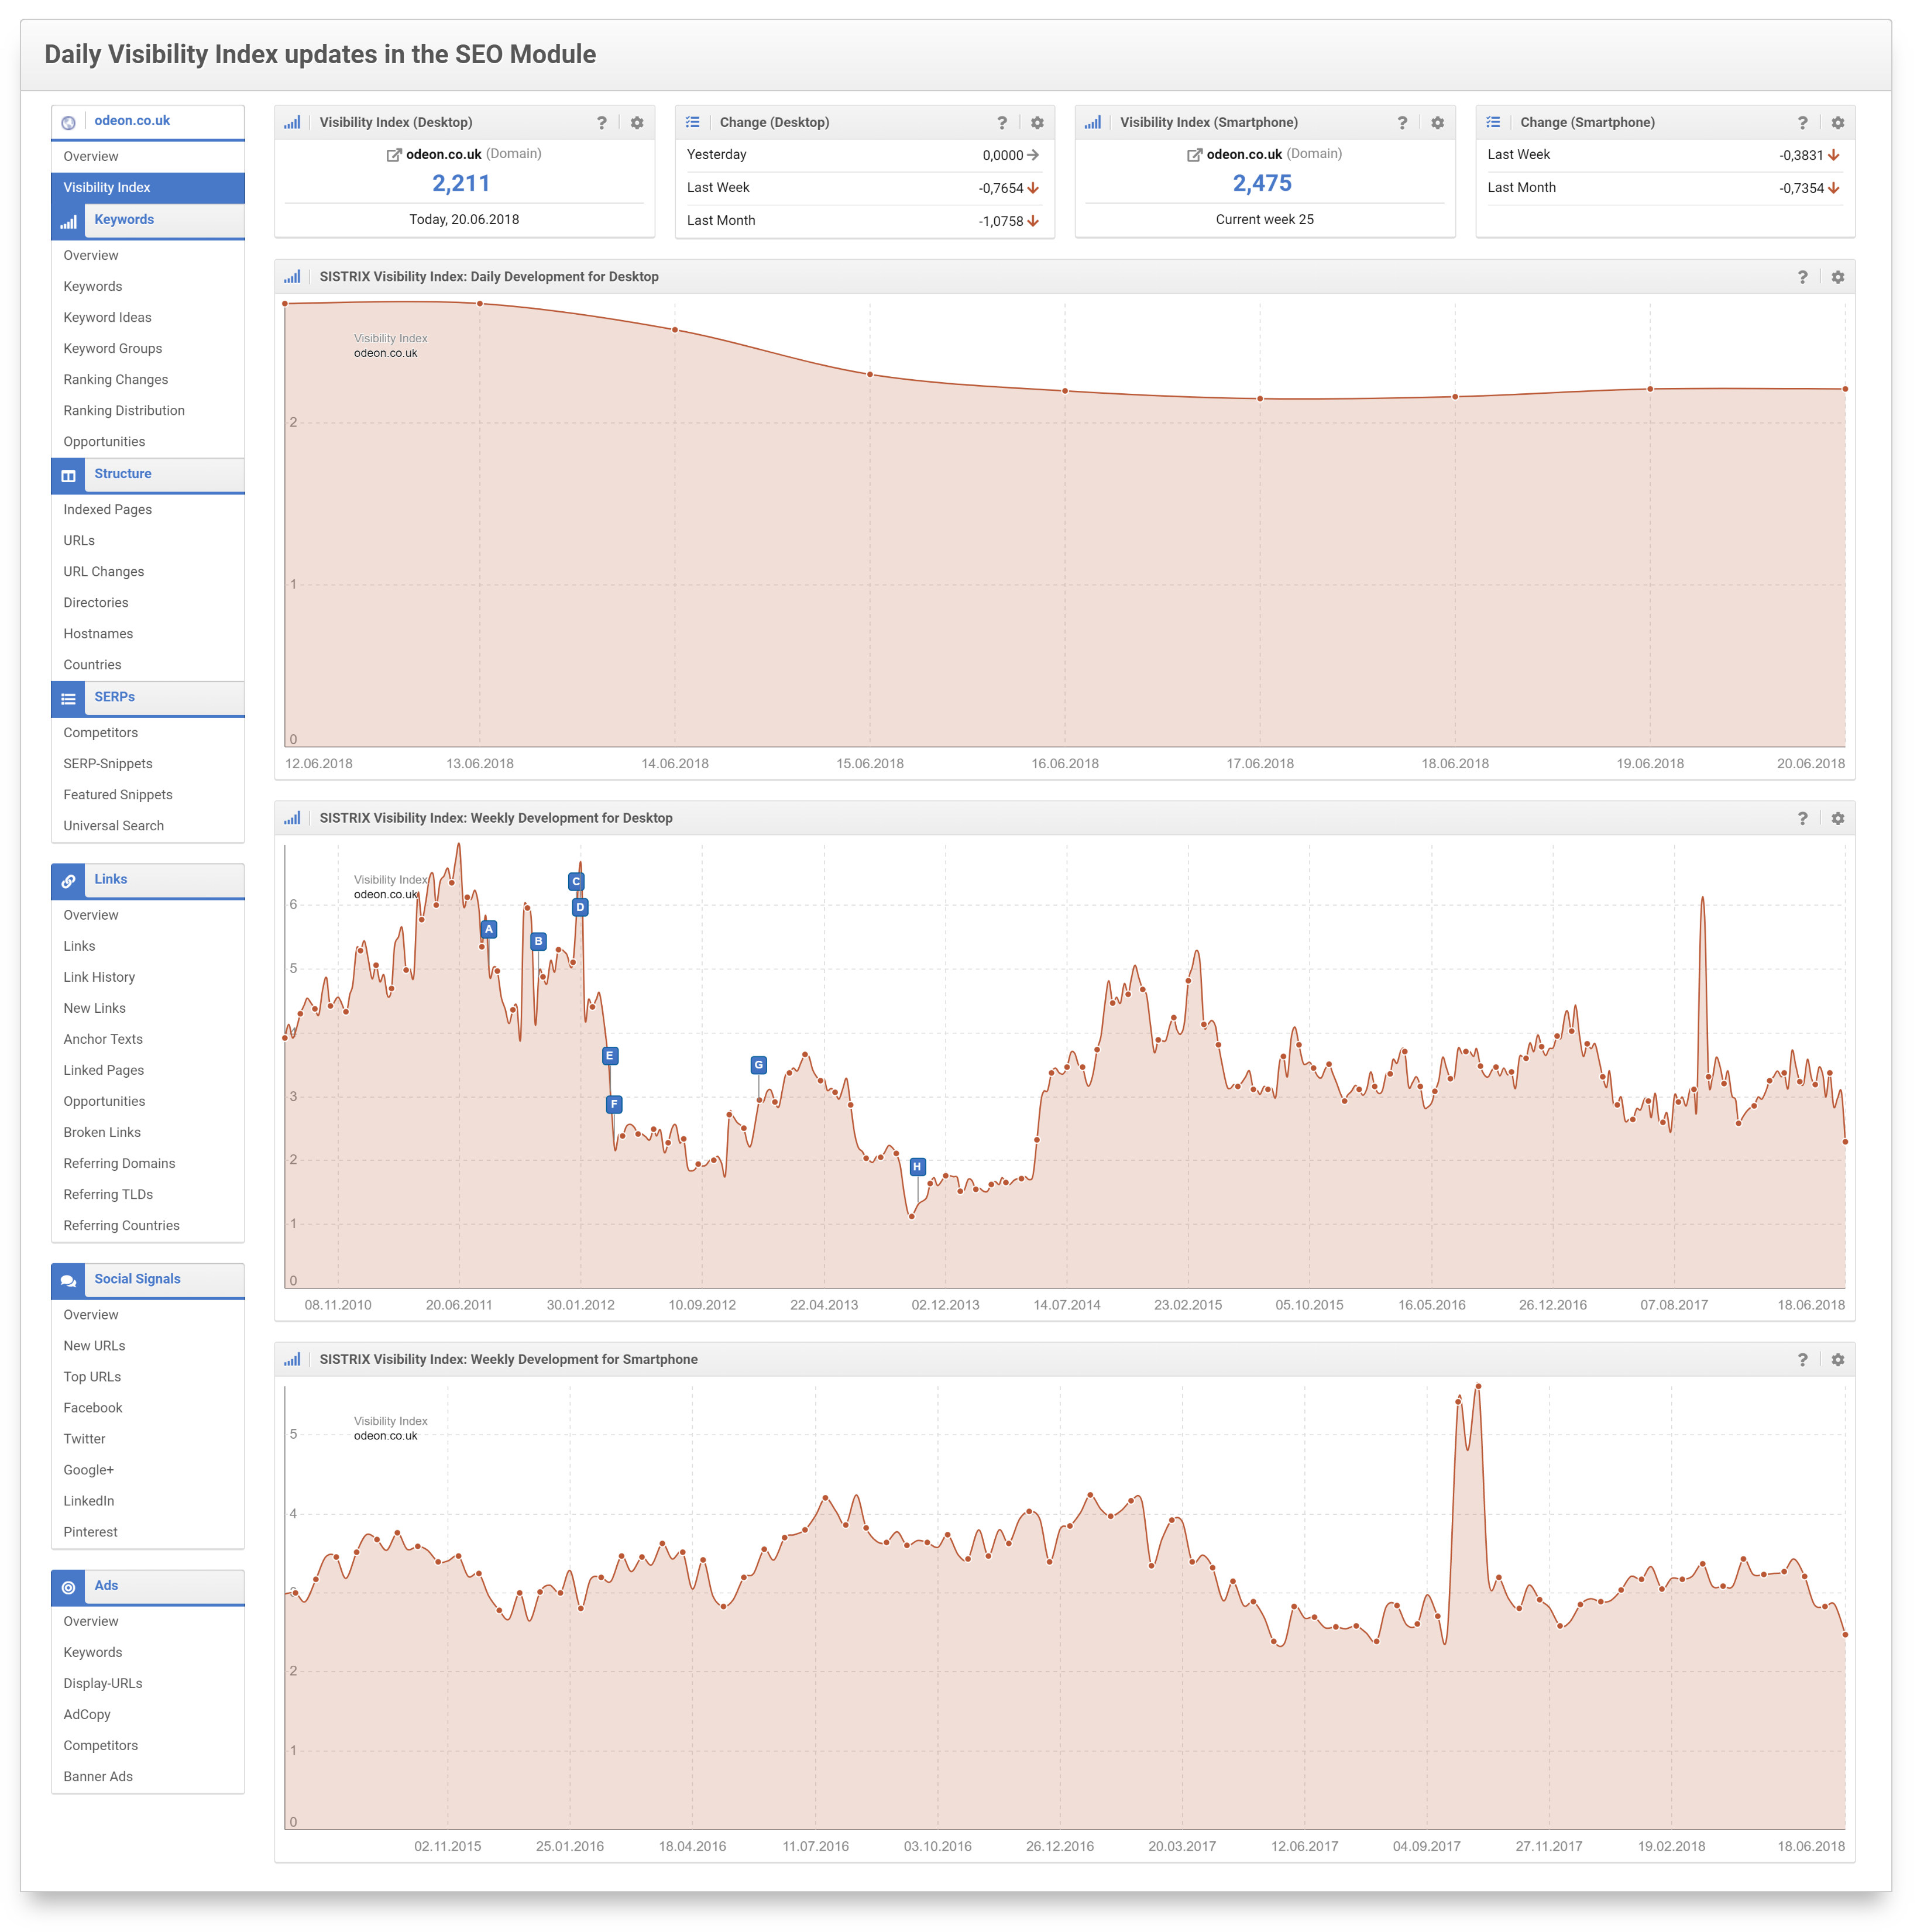 The Daily Visibility Index in the SEO Module